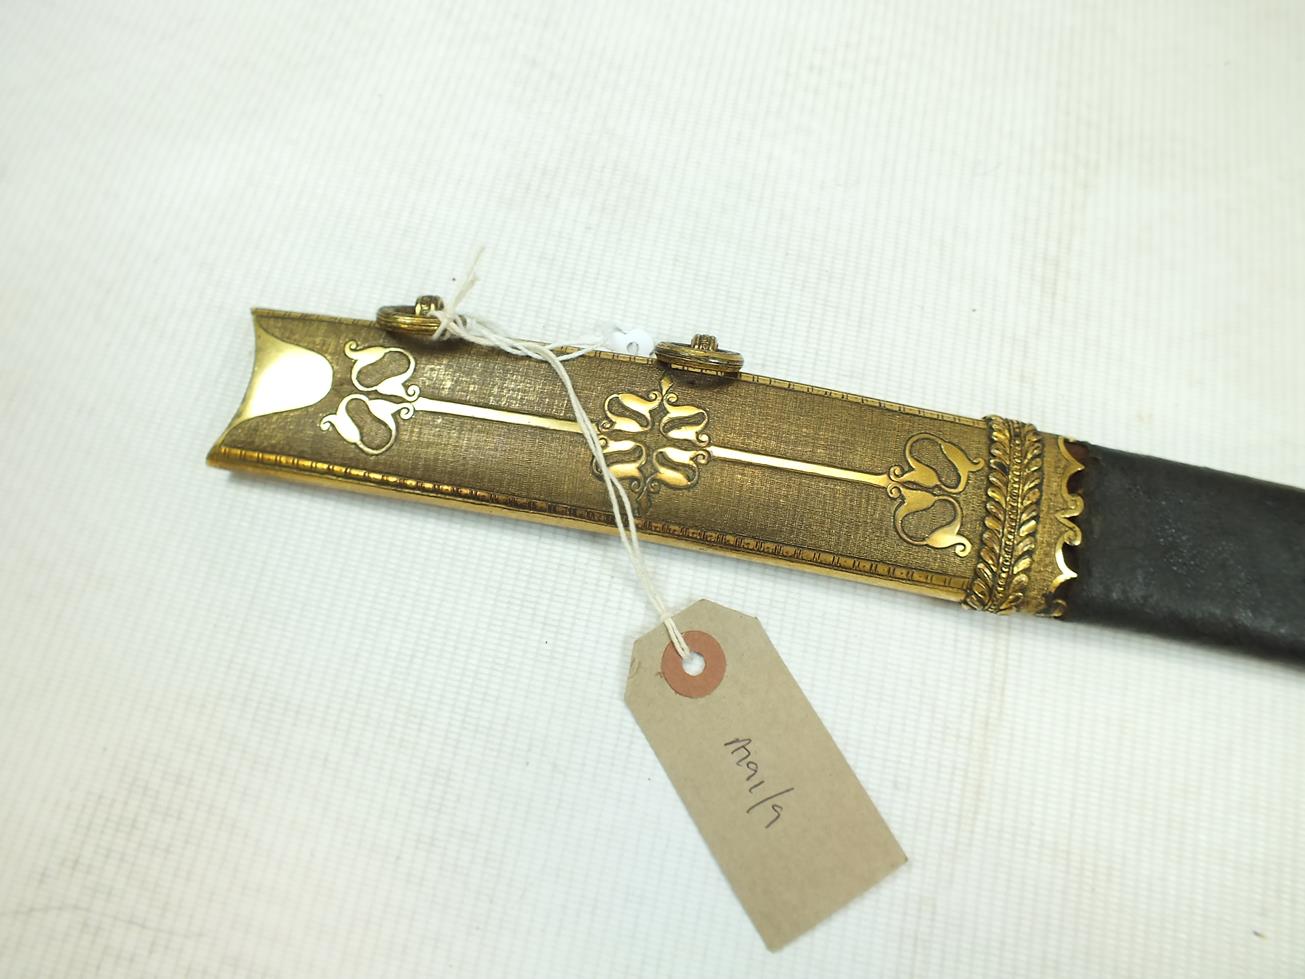 AN HIGHLY UNUSUAL PRESENTATION QUALITY MAMELUKE HILTED DIRK MOUNTED WITH A YATAGHAN BLADE BY SALTER, - Image 19 of 26